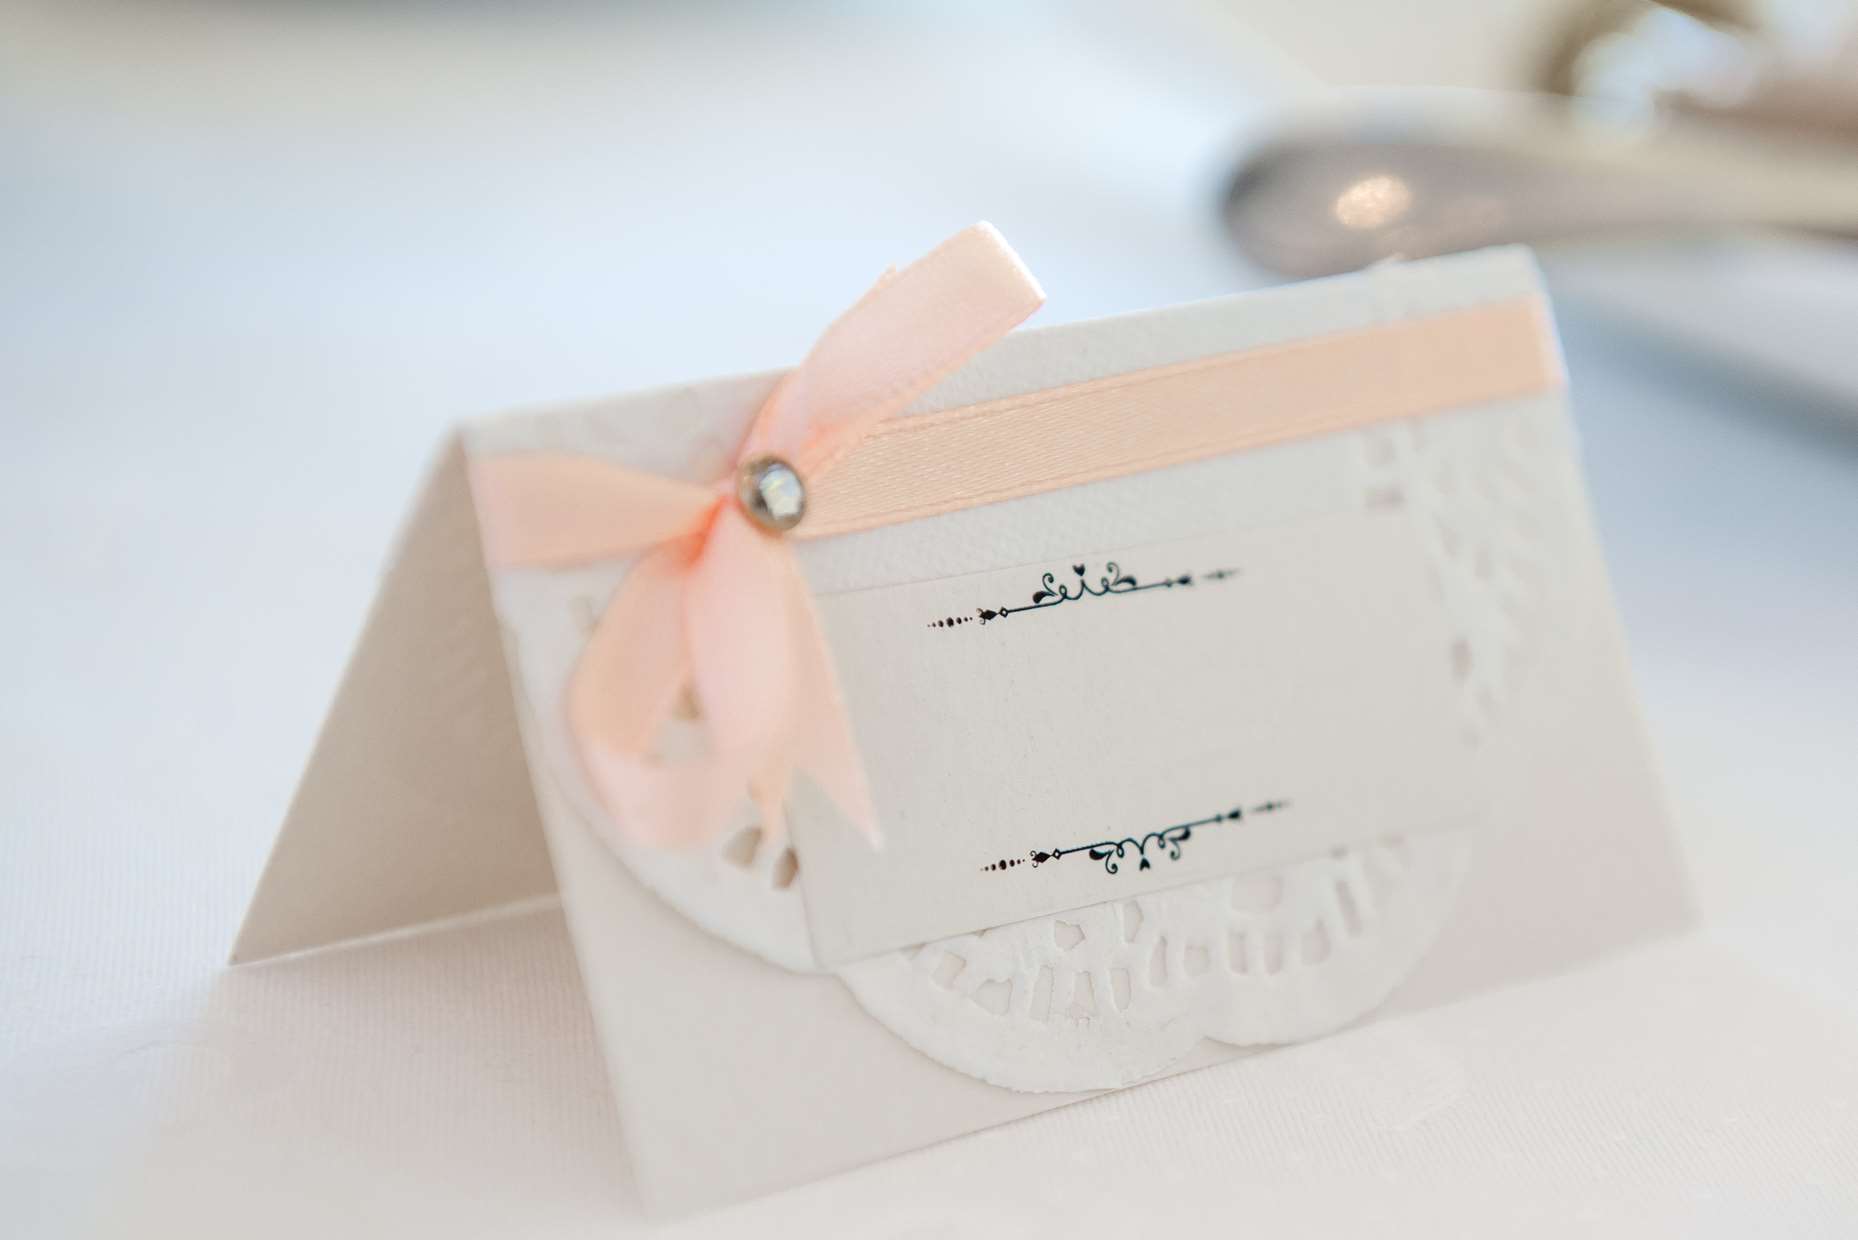 Placecards often follow the same style as your initial invitations